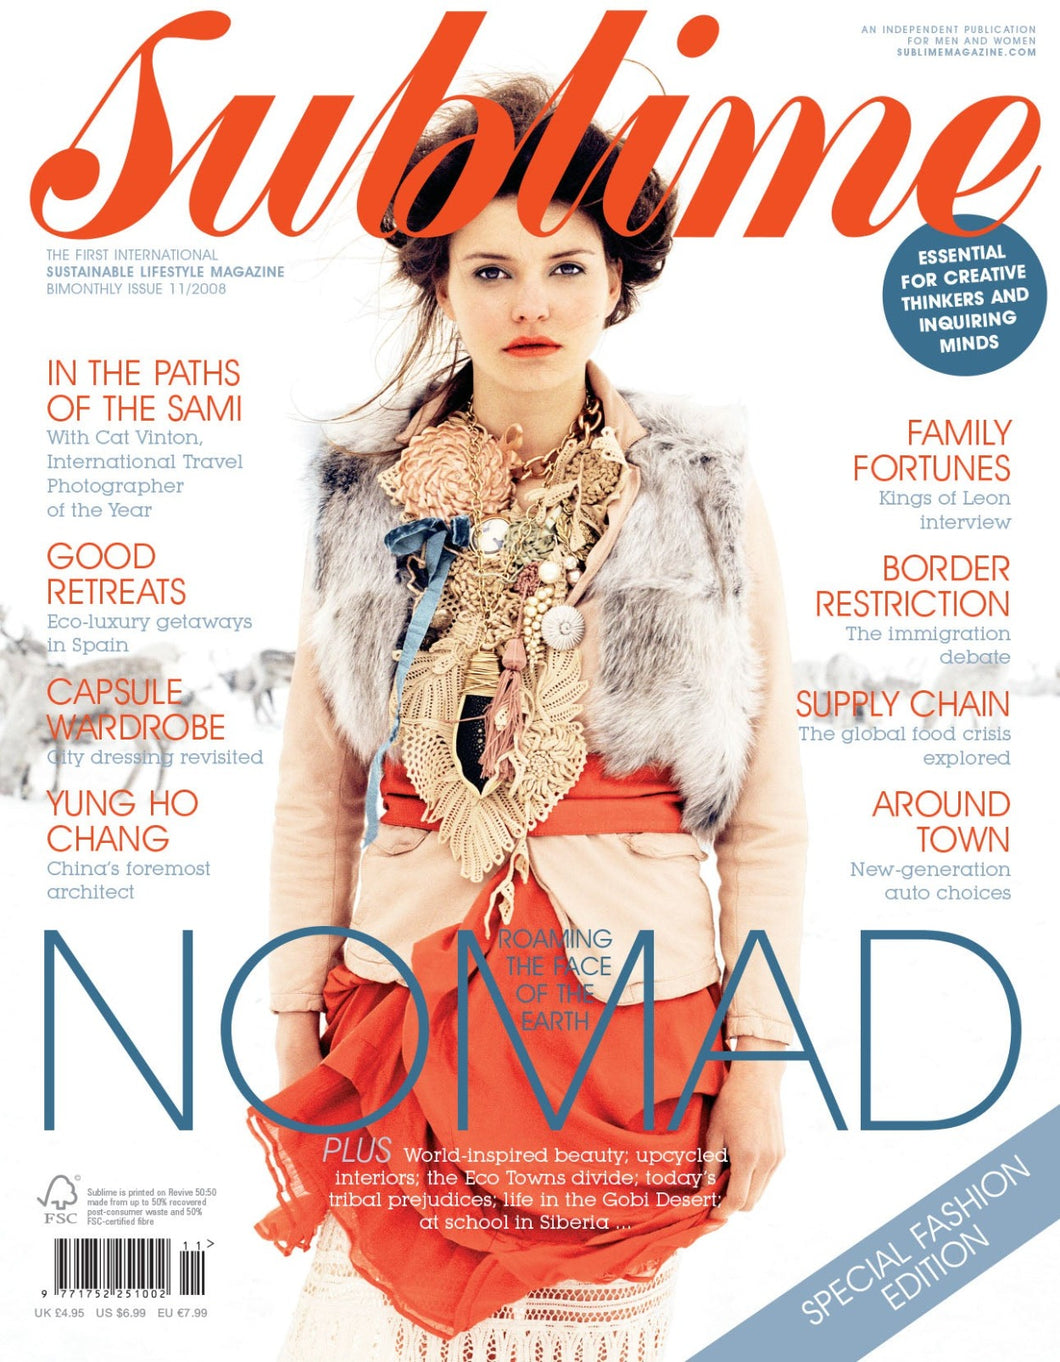 Issue 11 - Nomad